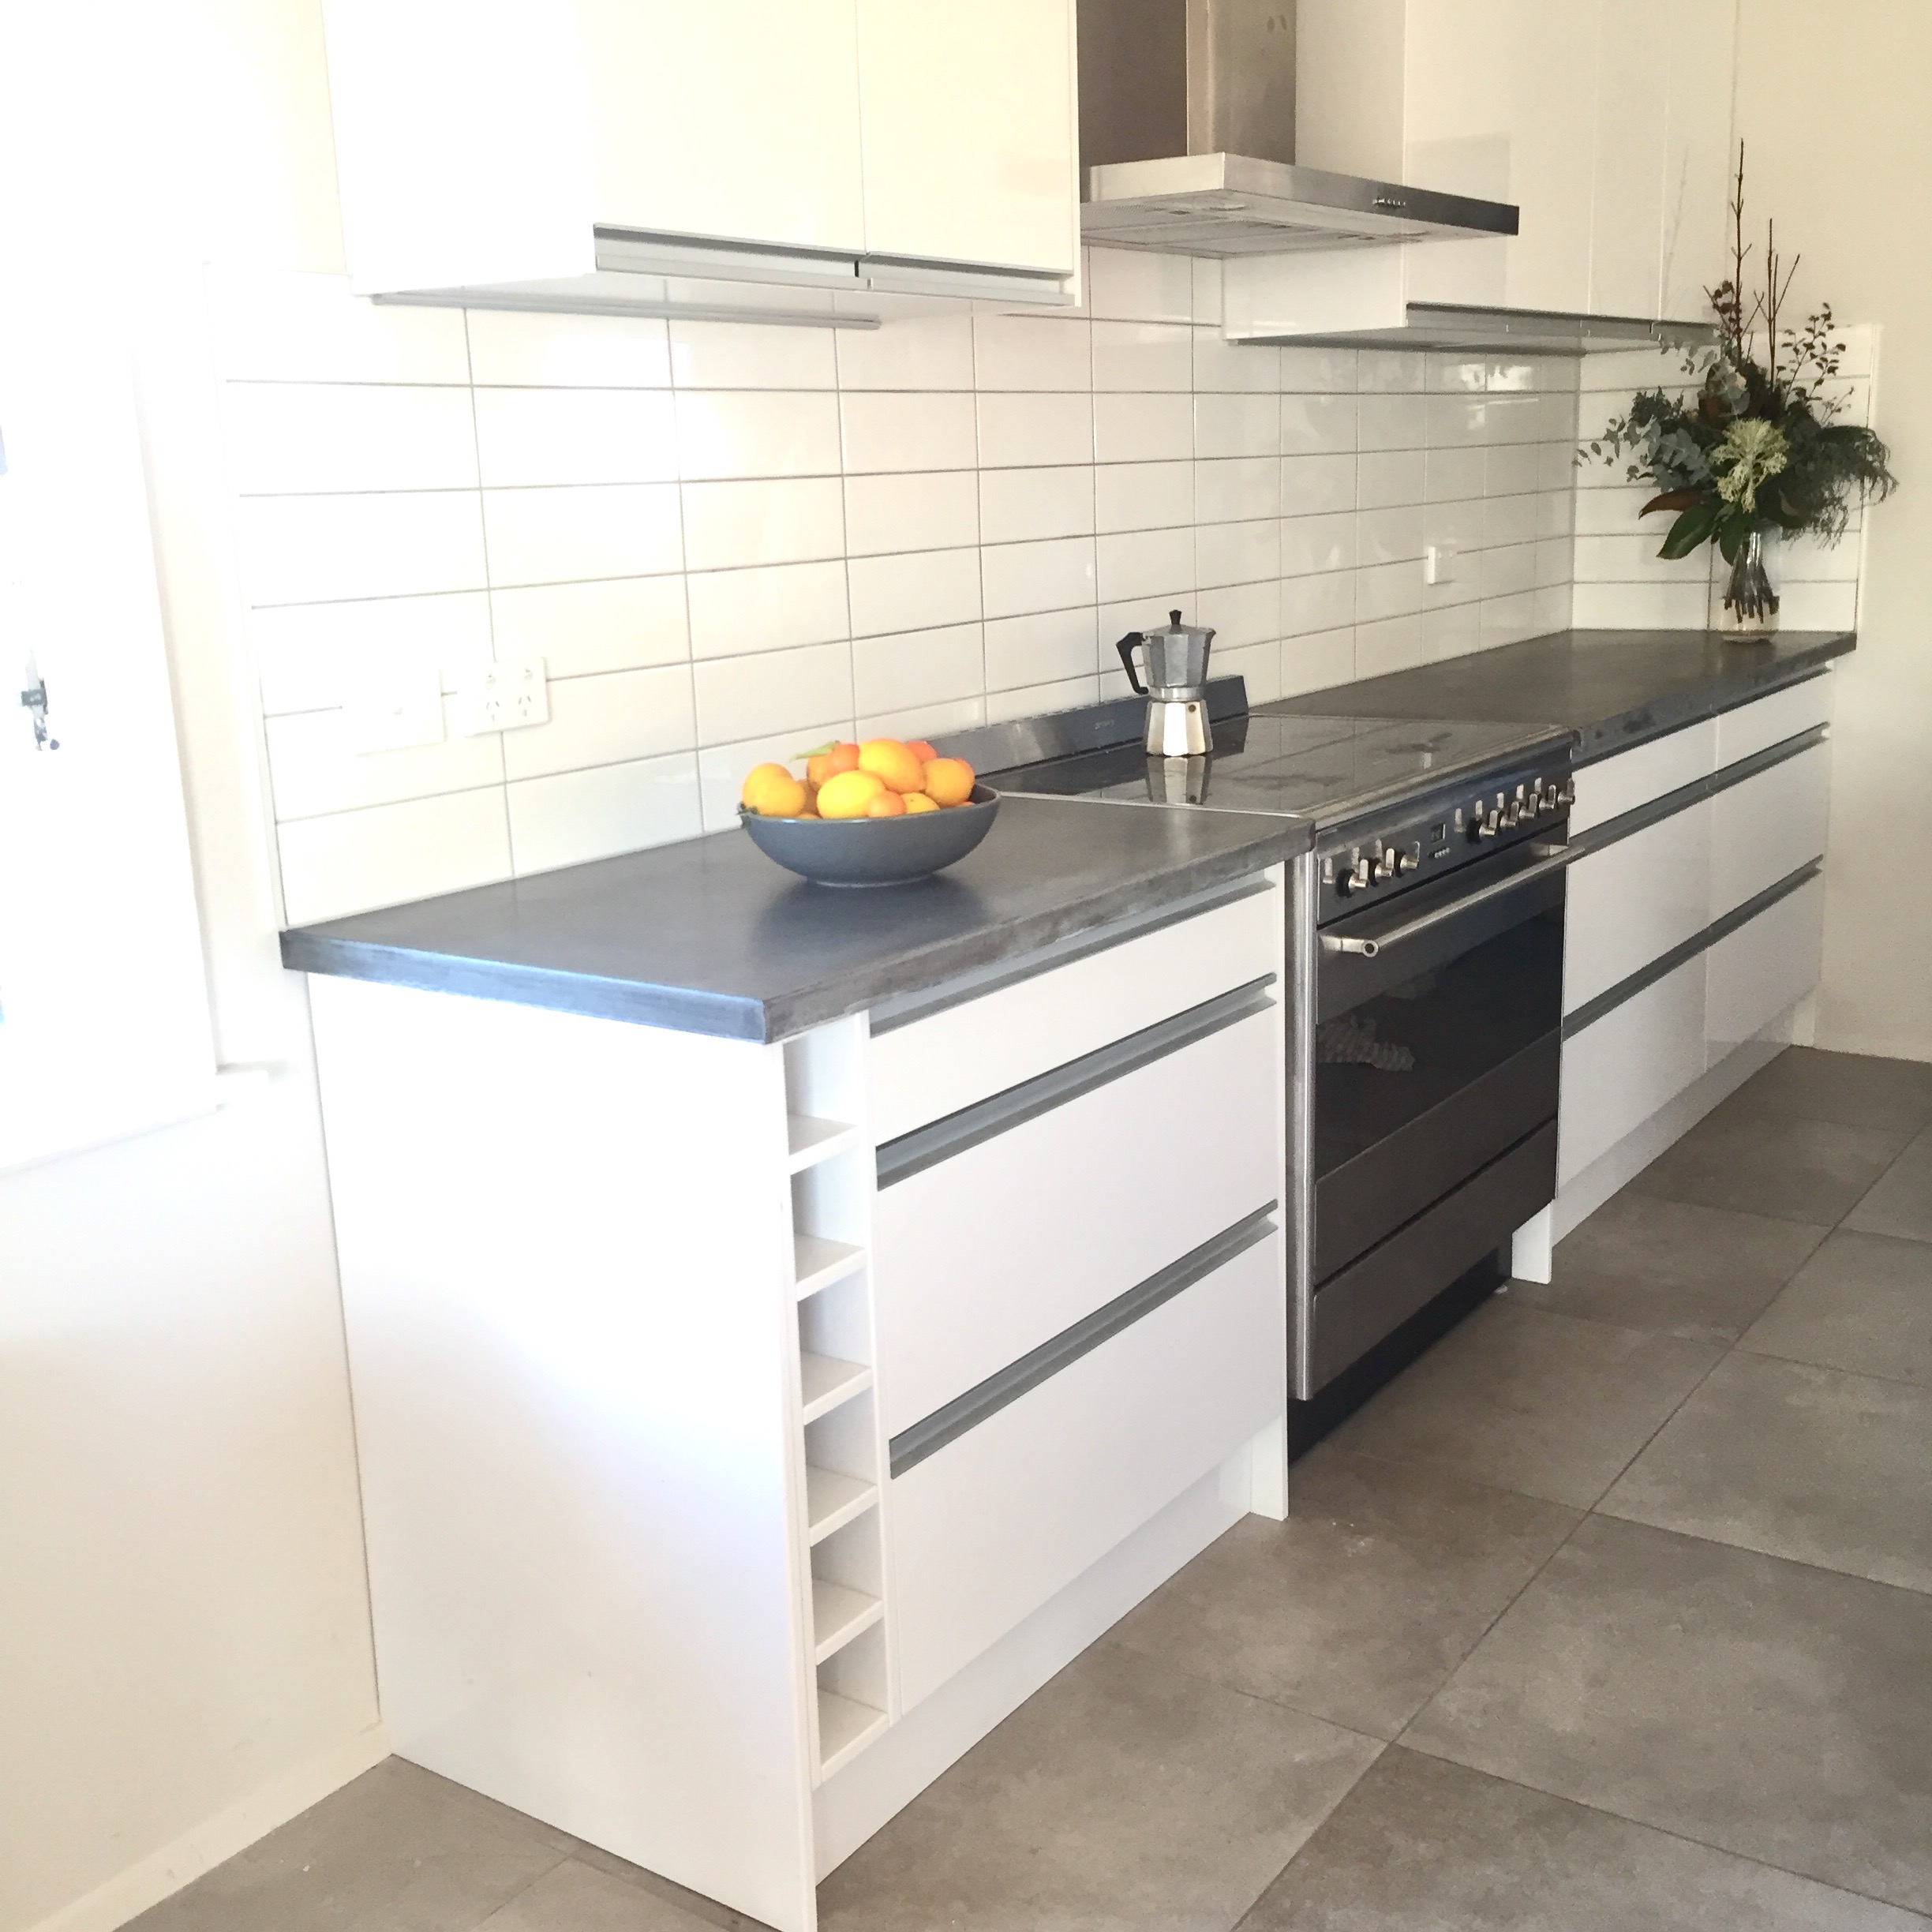 KITCHEN BENCHTOP – PRIVATE CLIENT